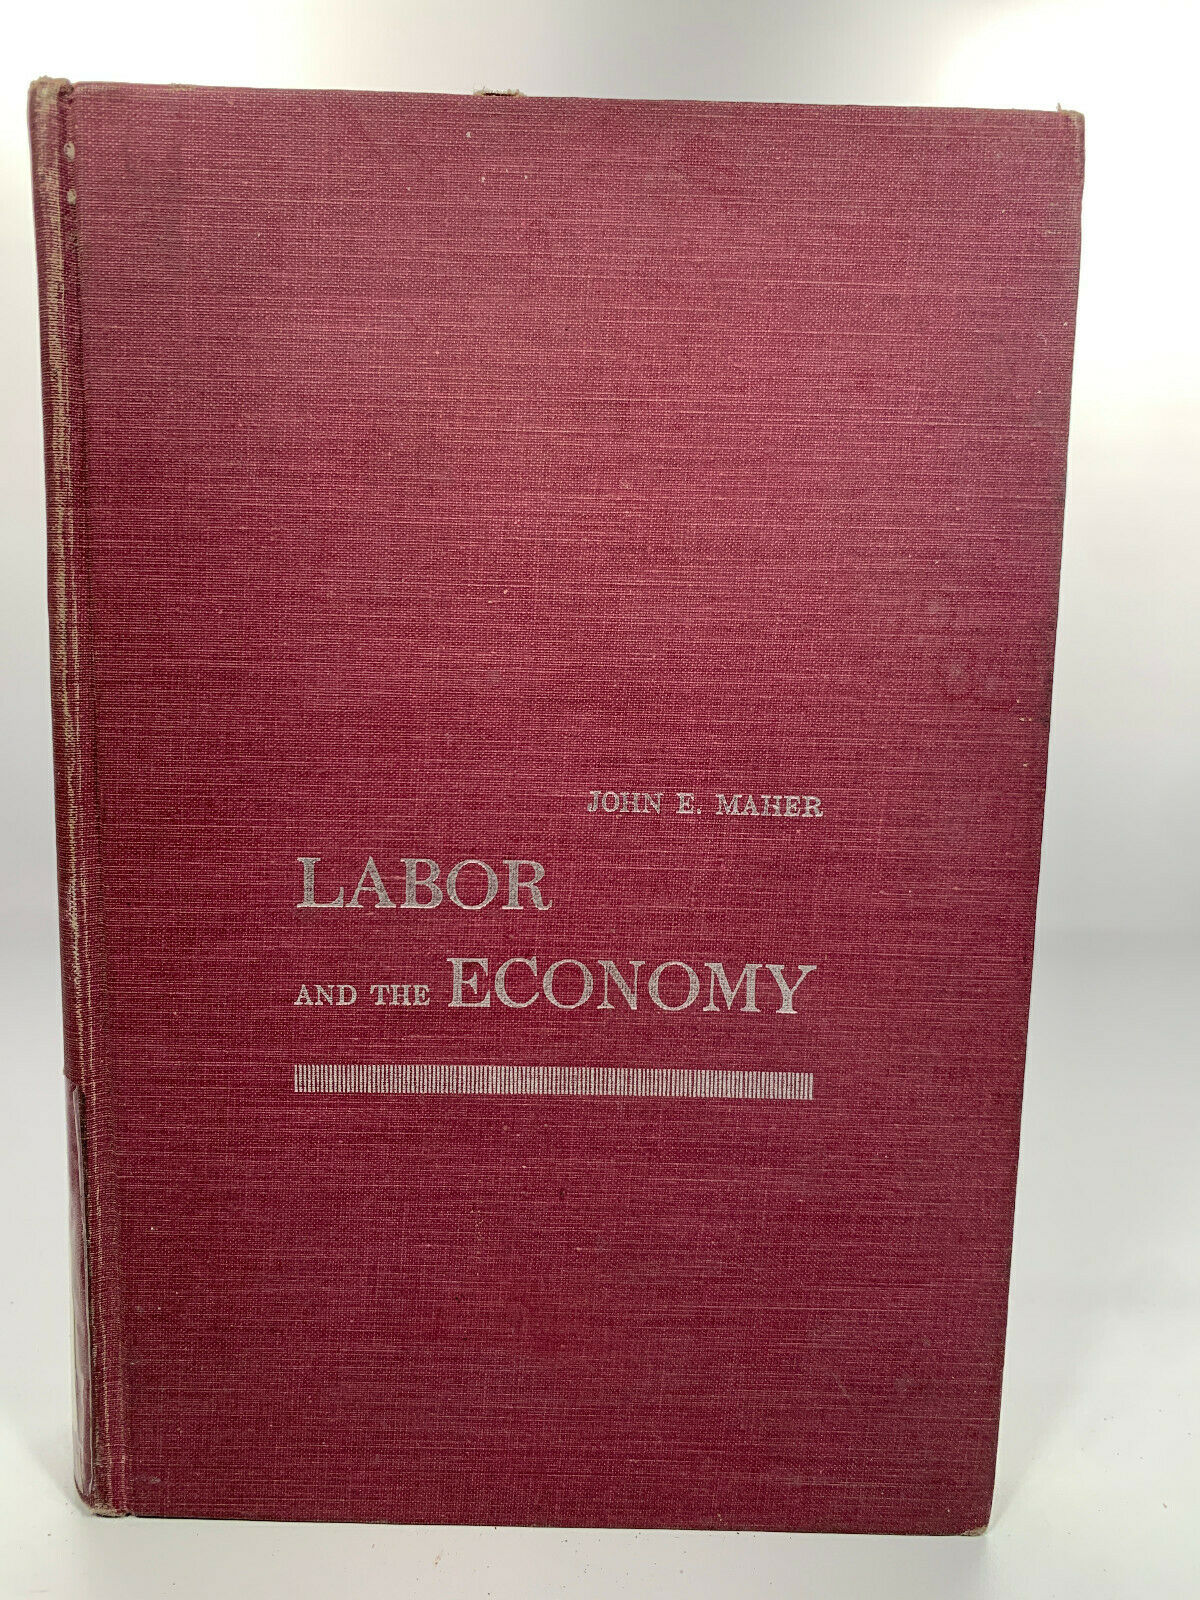 LABOR AND THE ECONOMY John Maher 1965 Ex Library